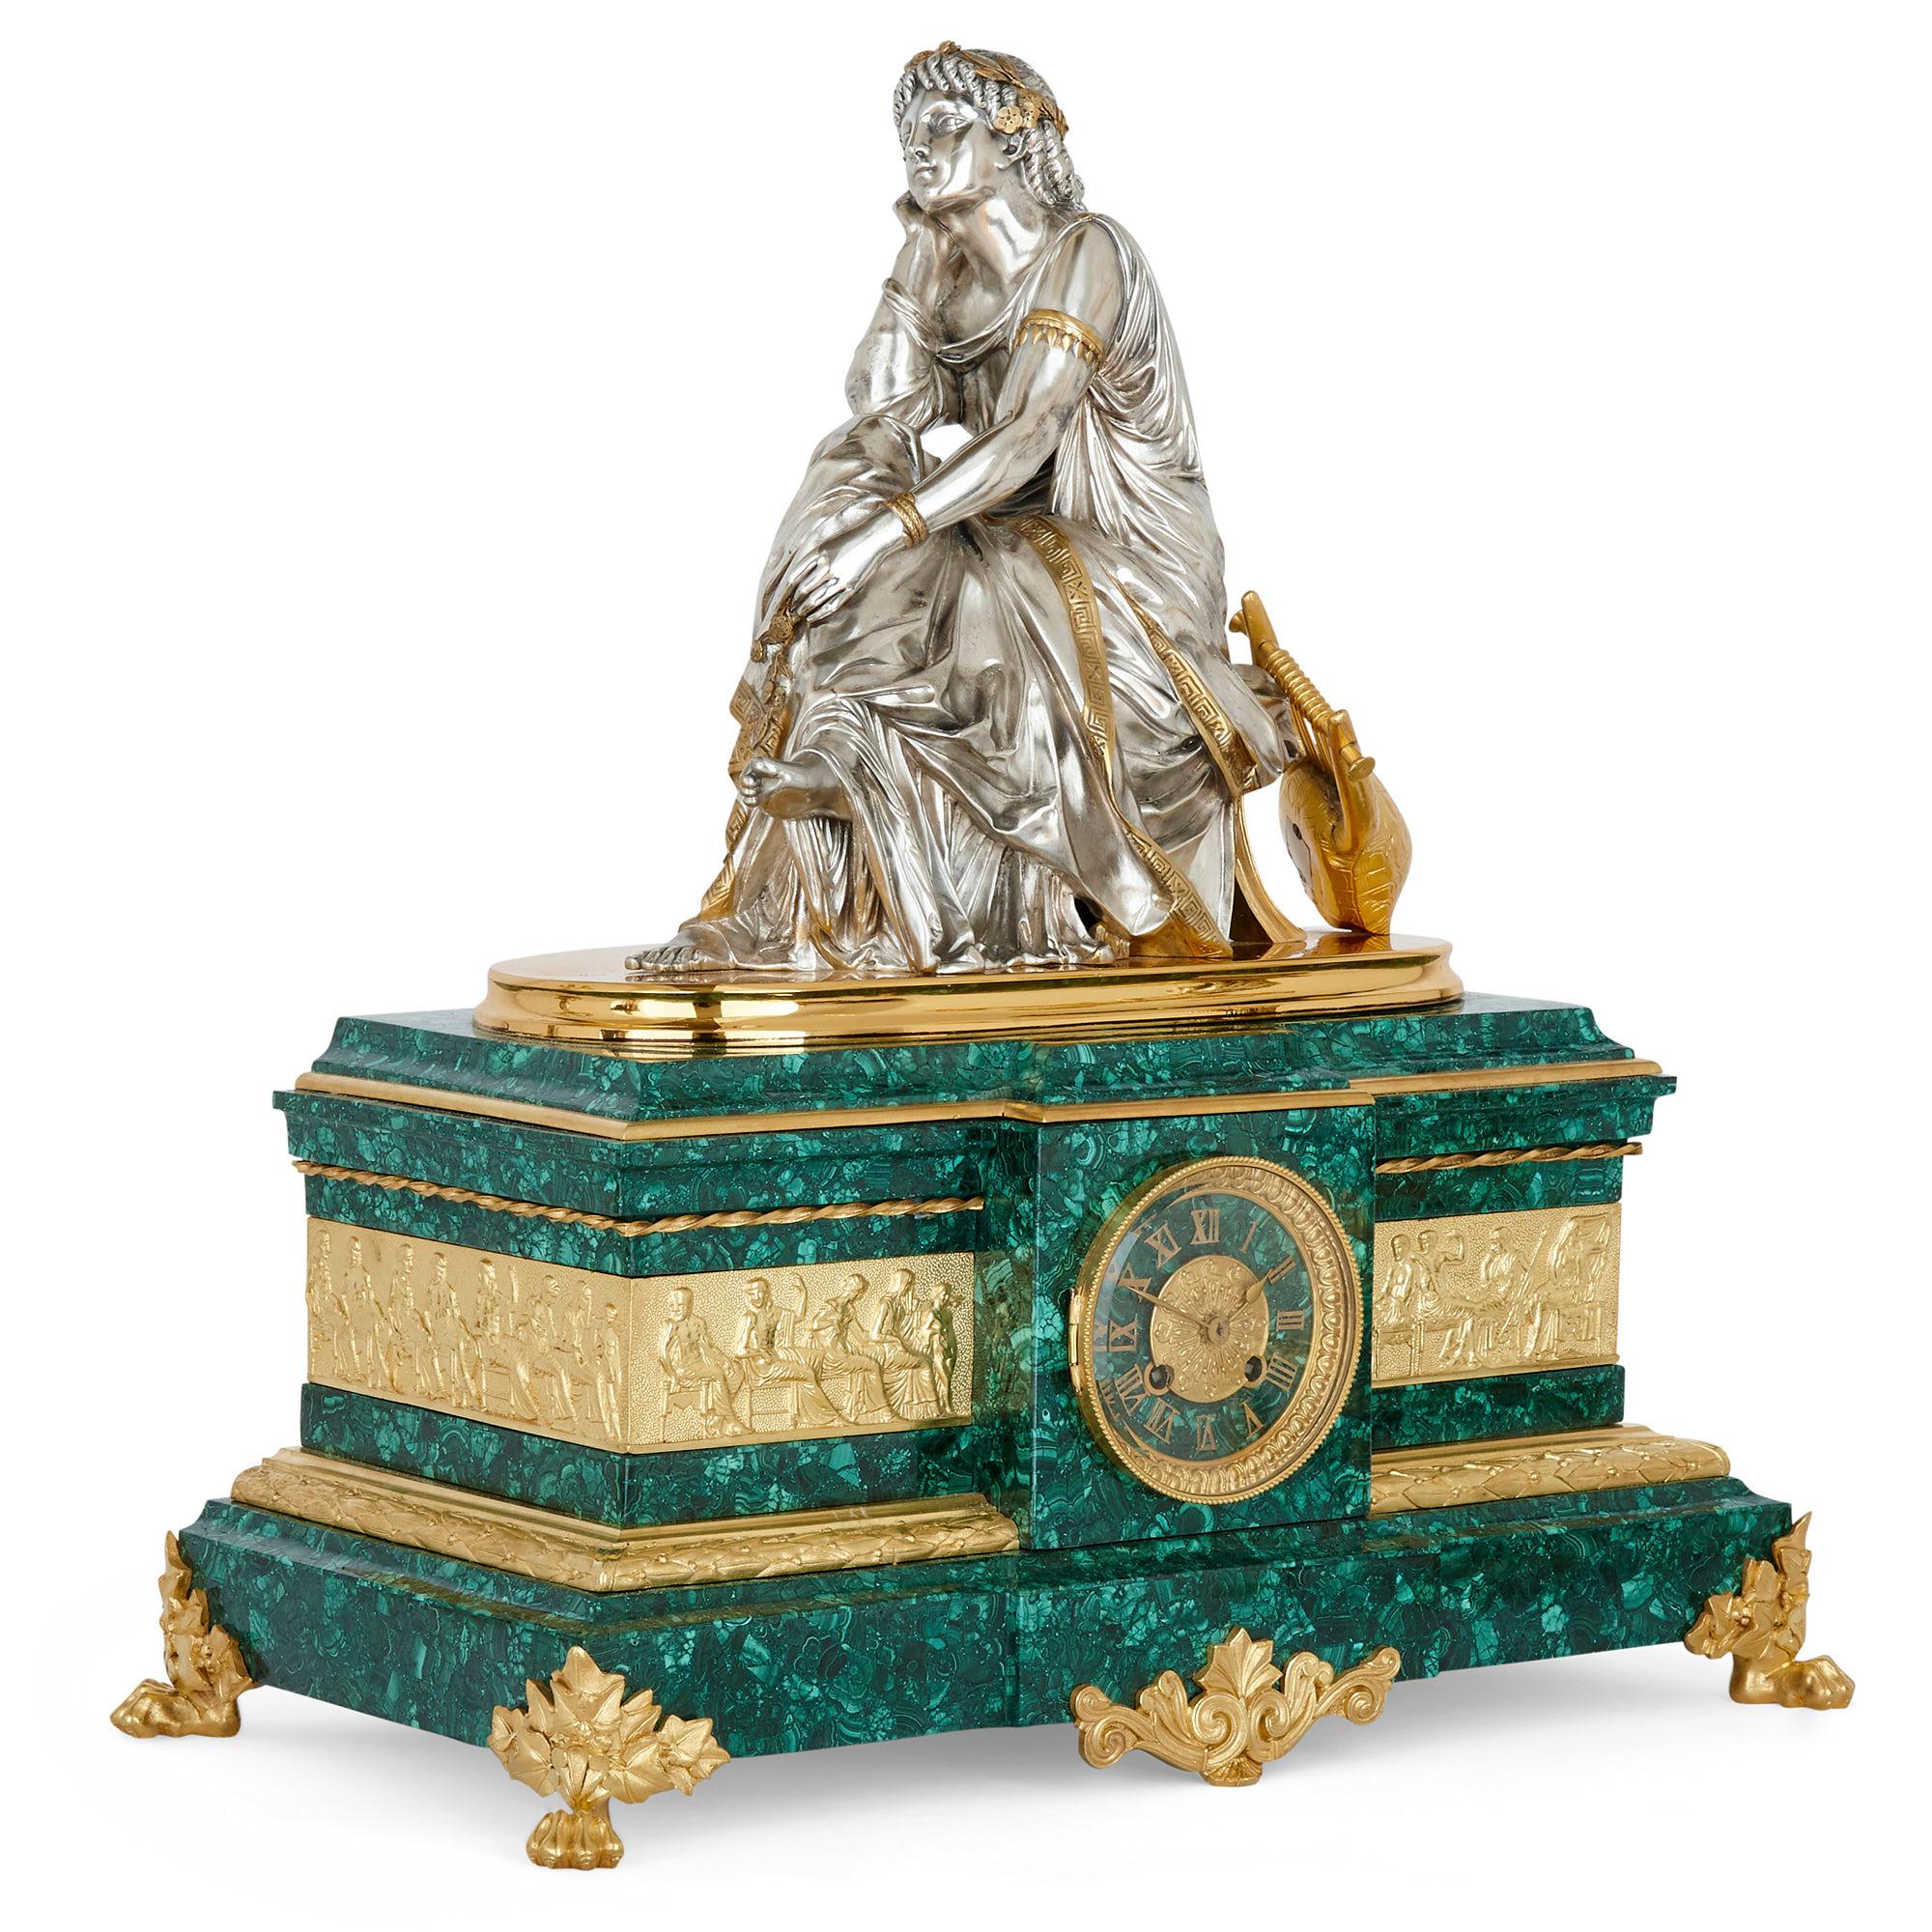 French ormolu and silvered bronze mounted malachite three-piece clock set
French, late 19th century
Clock: Height 56cm, width 53cm, depth 28cm
Candelabra: Height 66cm, width 30cm, depth 30cm

This fine three-piece clock set is wrought from gilt